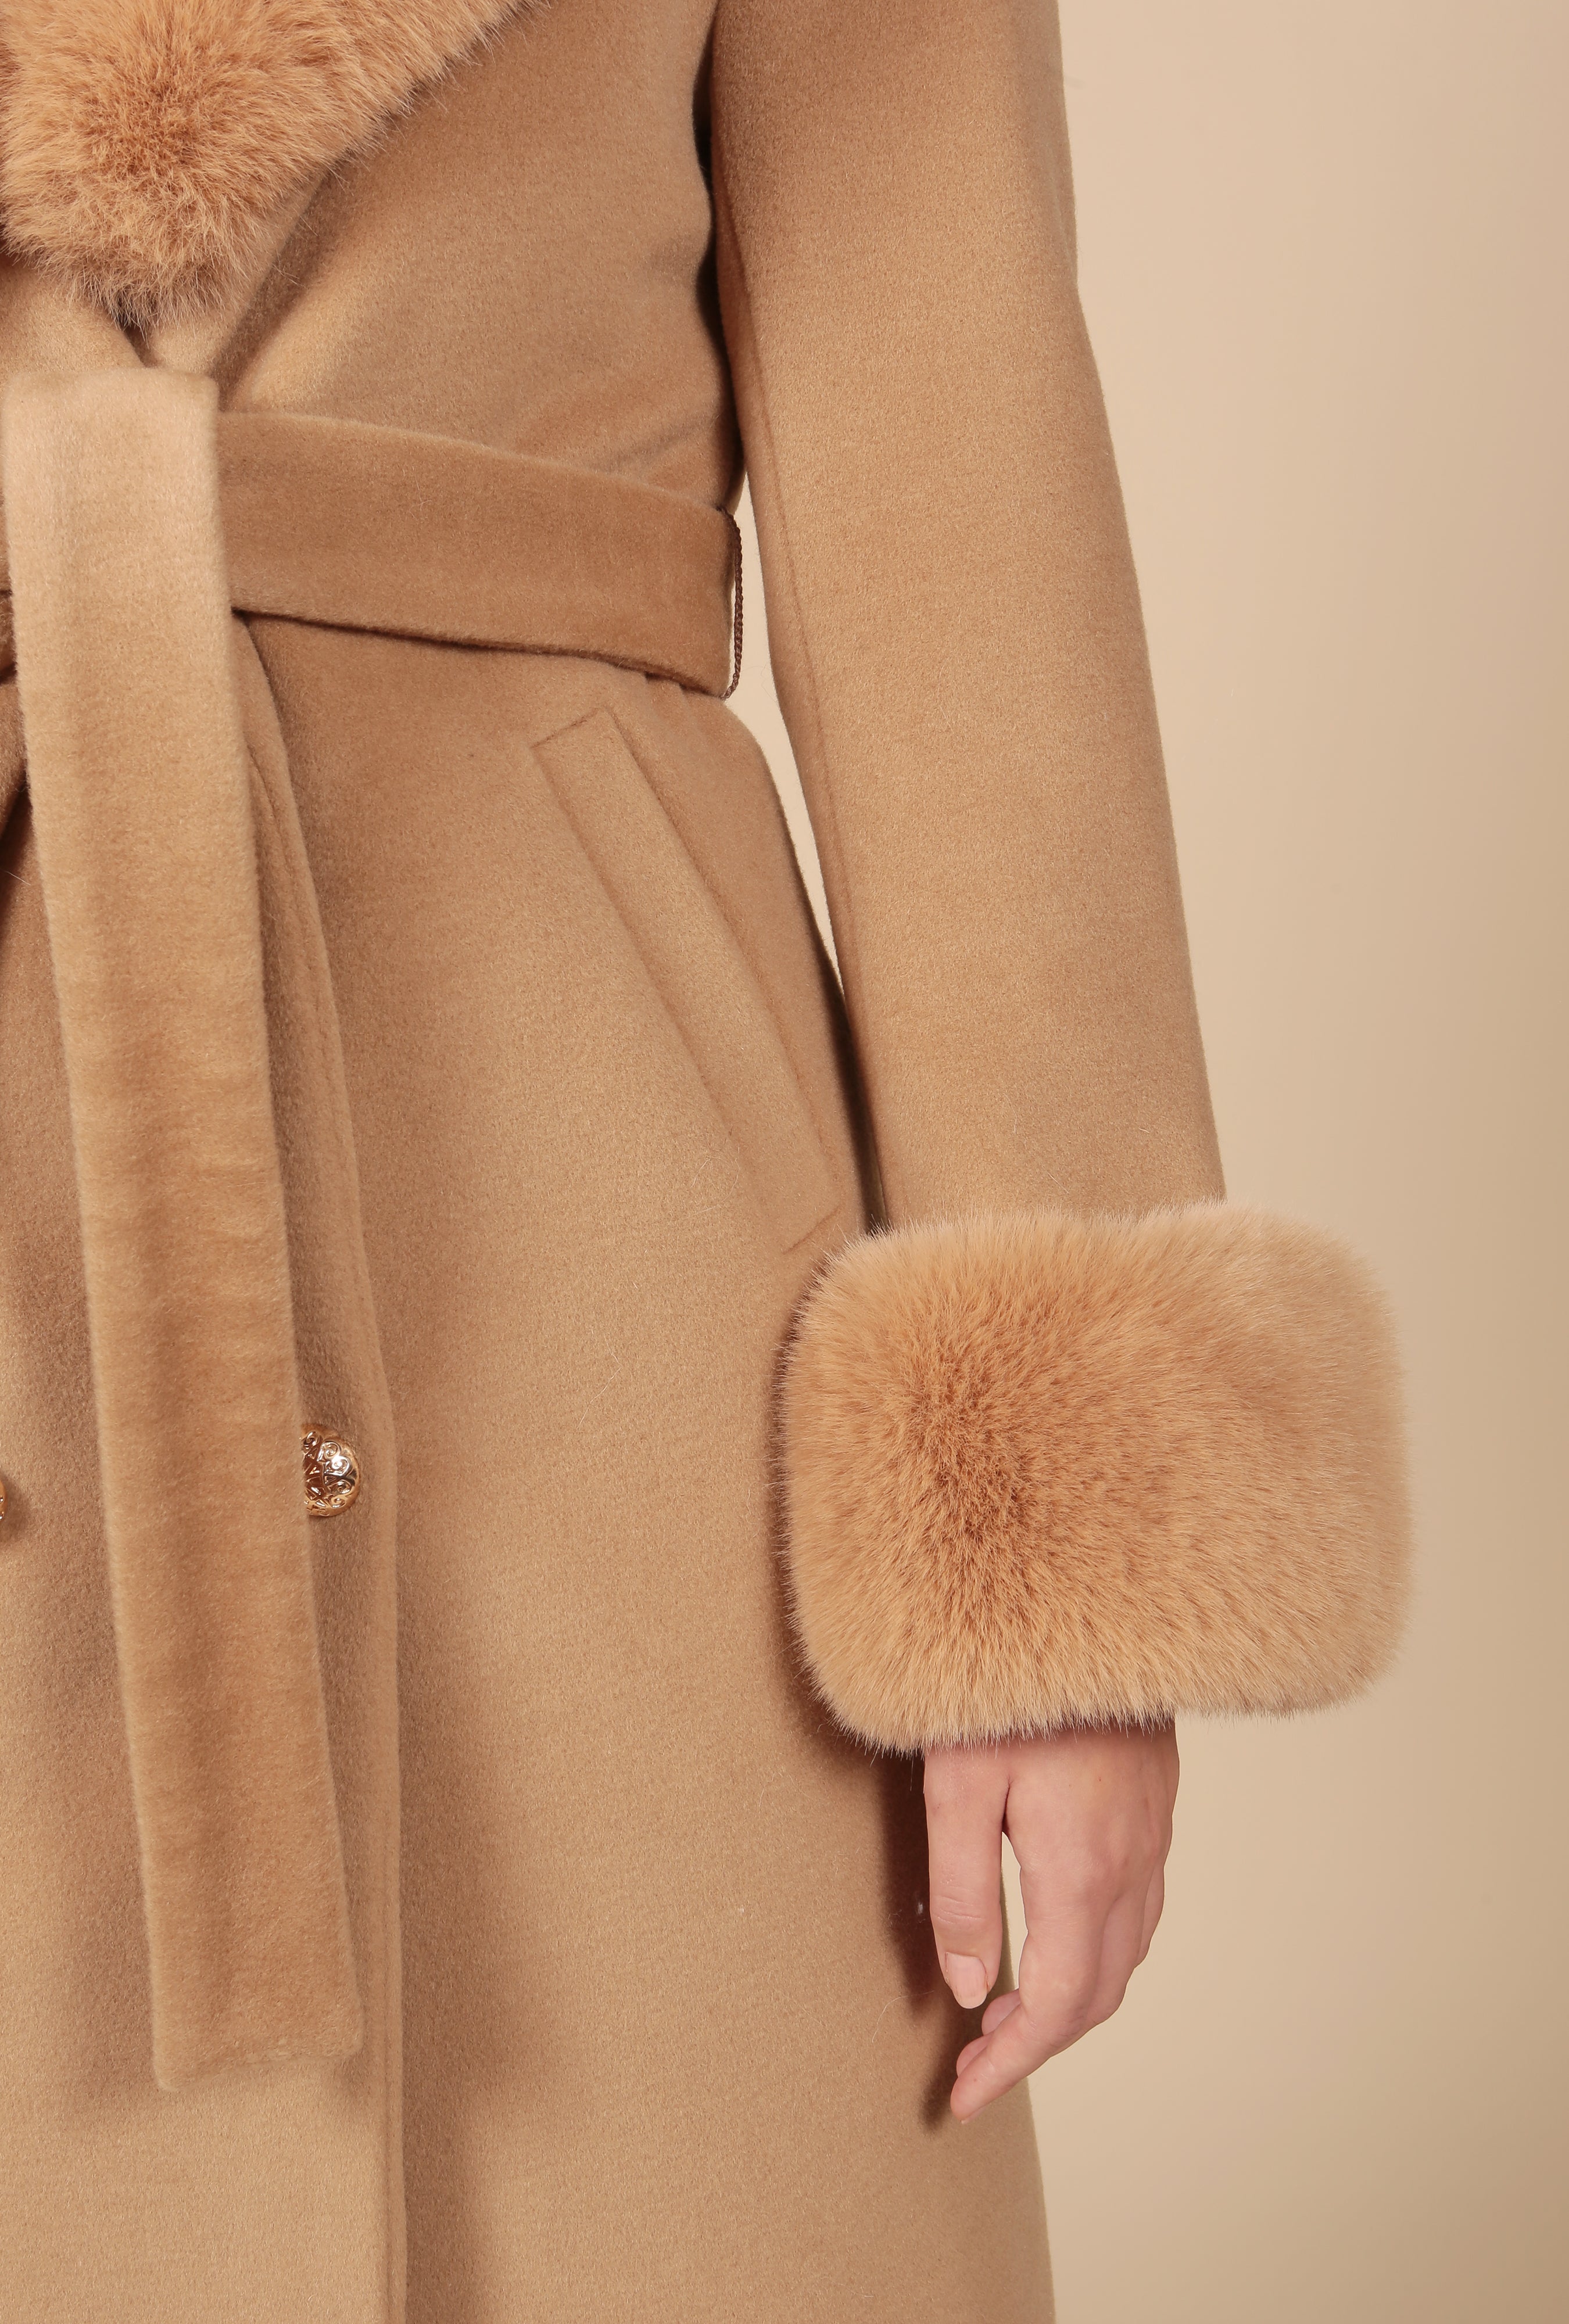 ‘Marlene' Cashmere and Wool Coat in Marrone